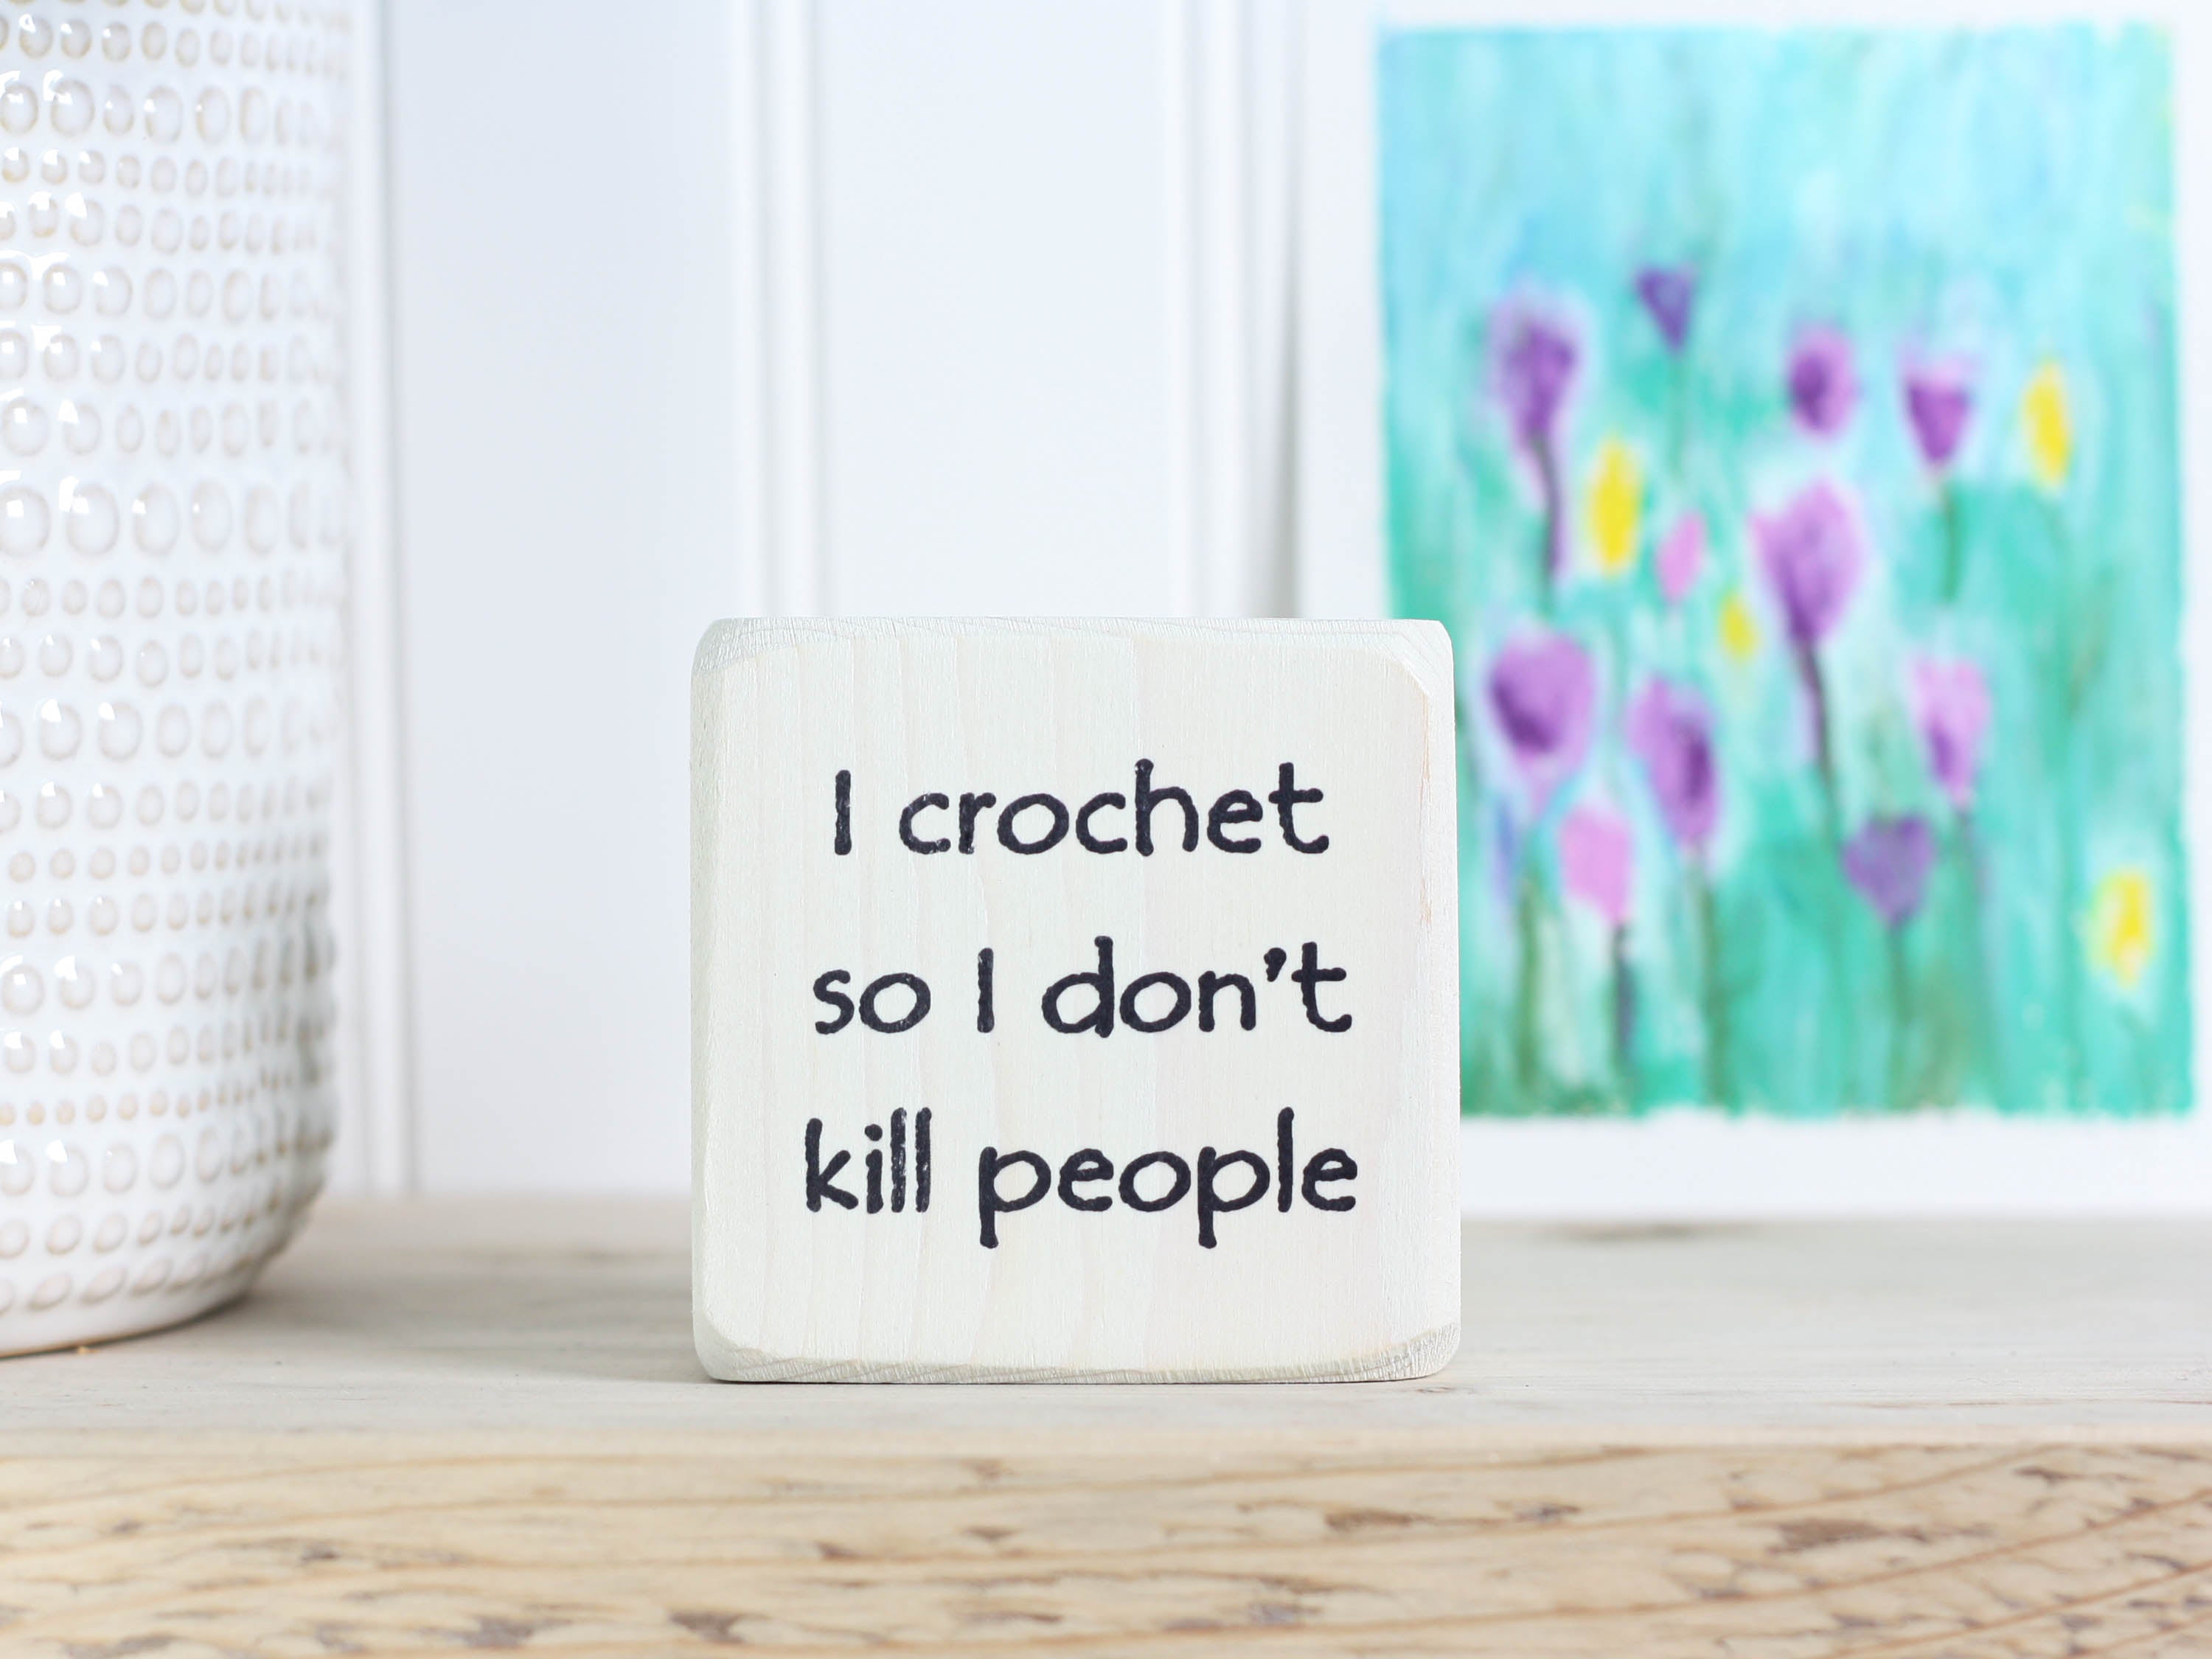 mini wood sign in whitewash with the text "I crochet so I don't kill people"